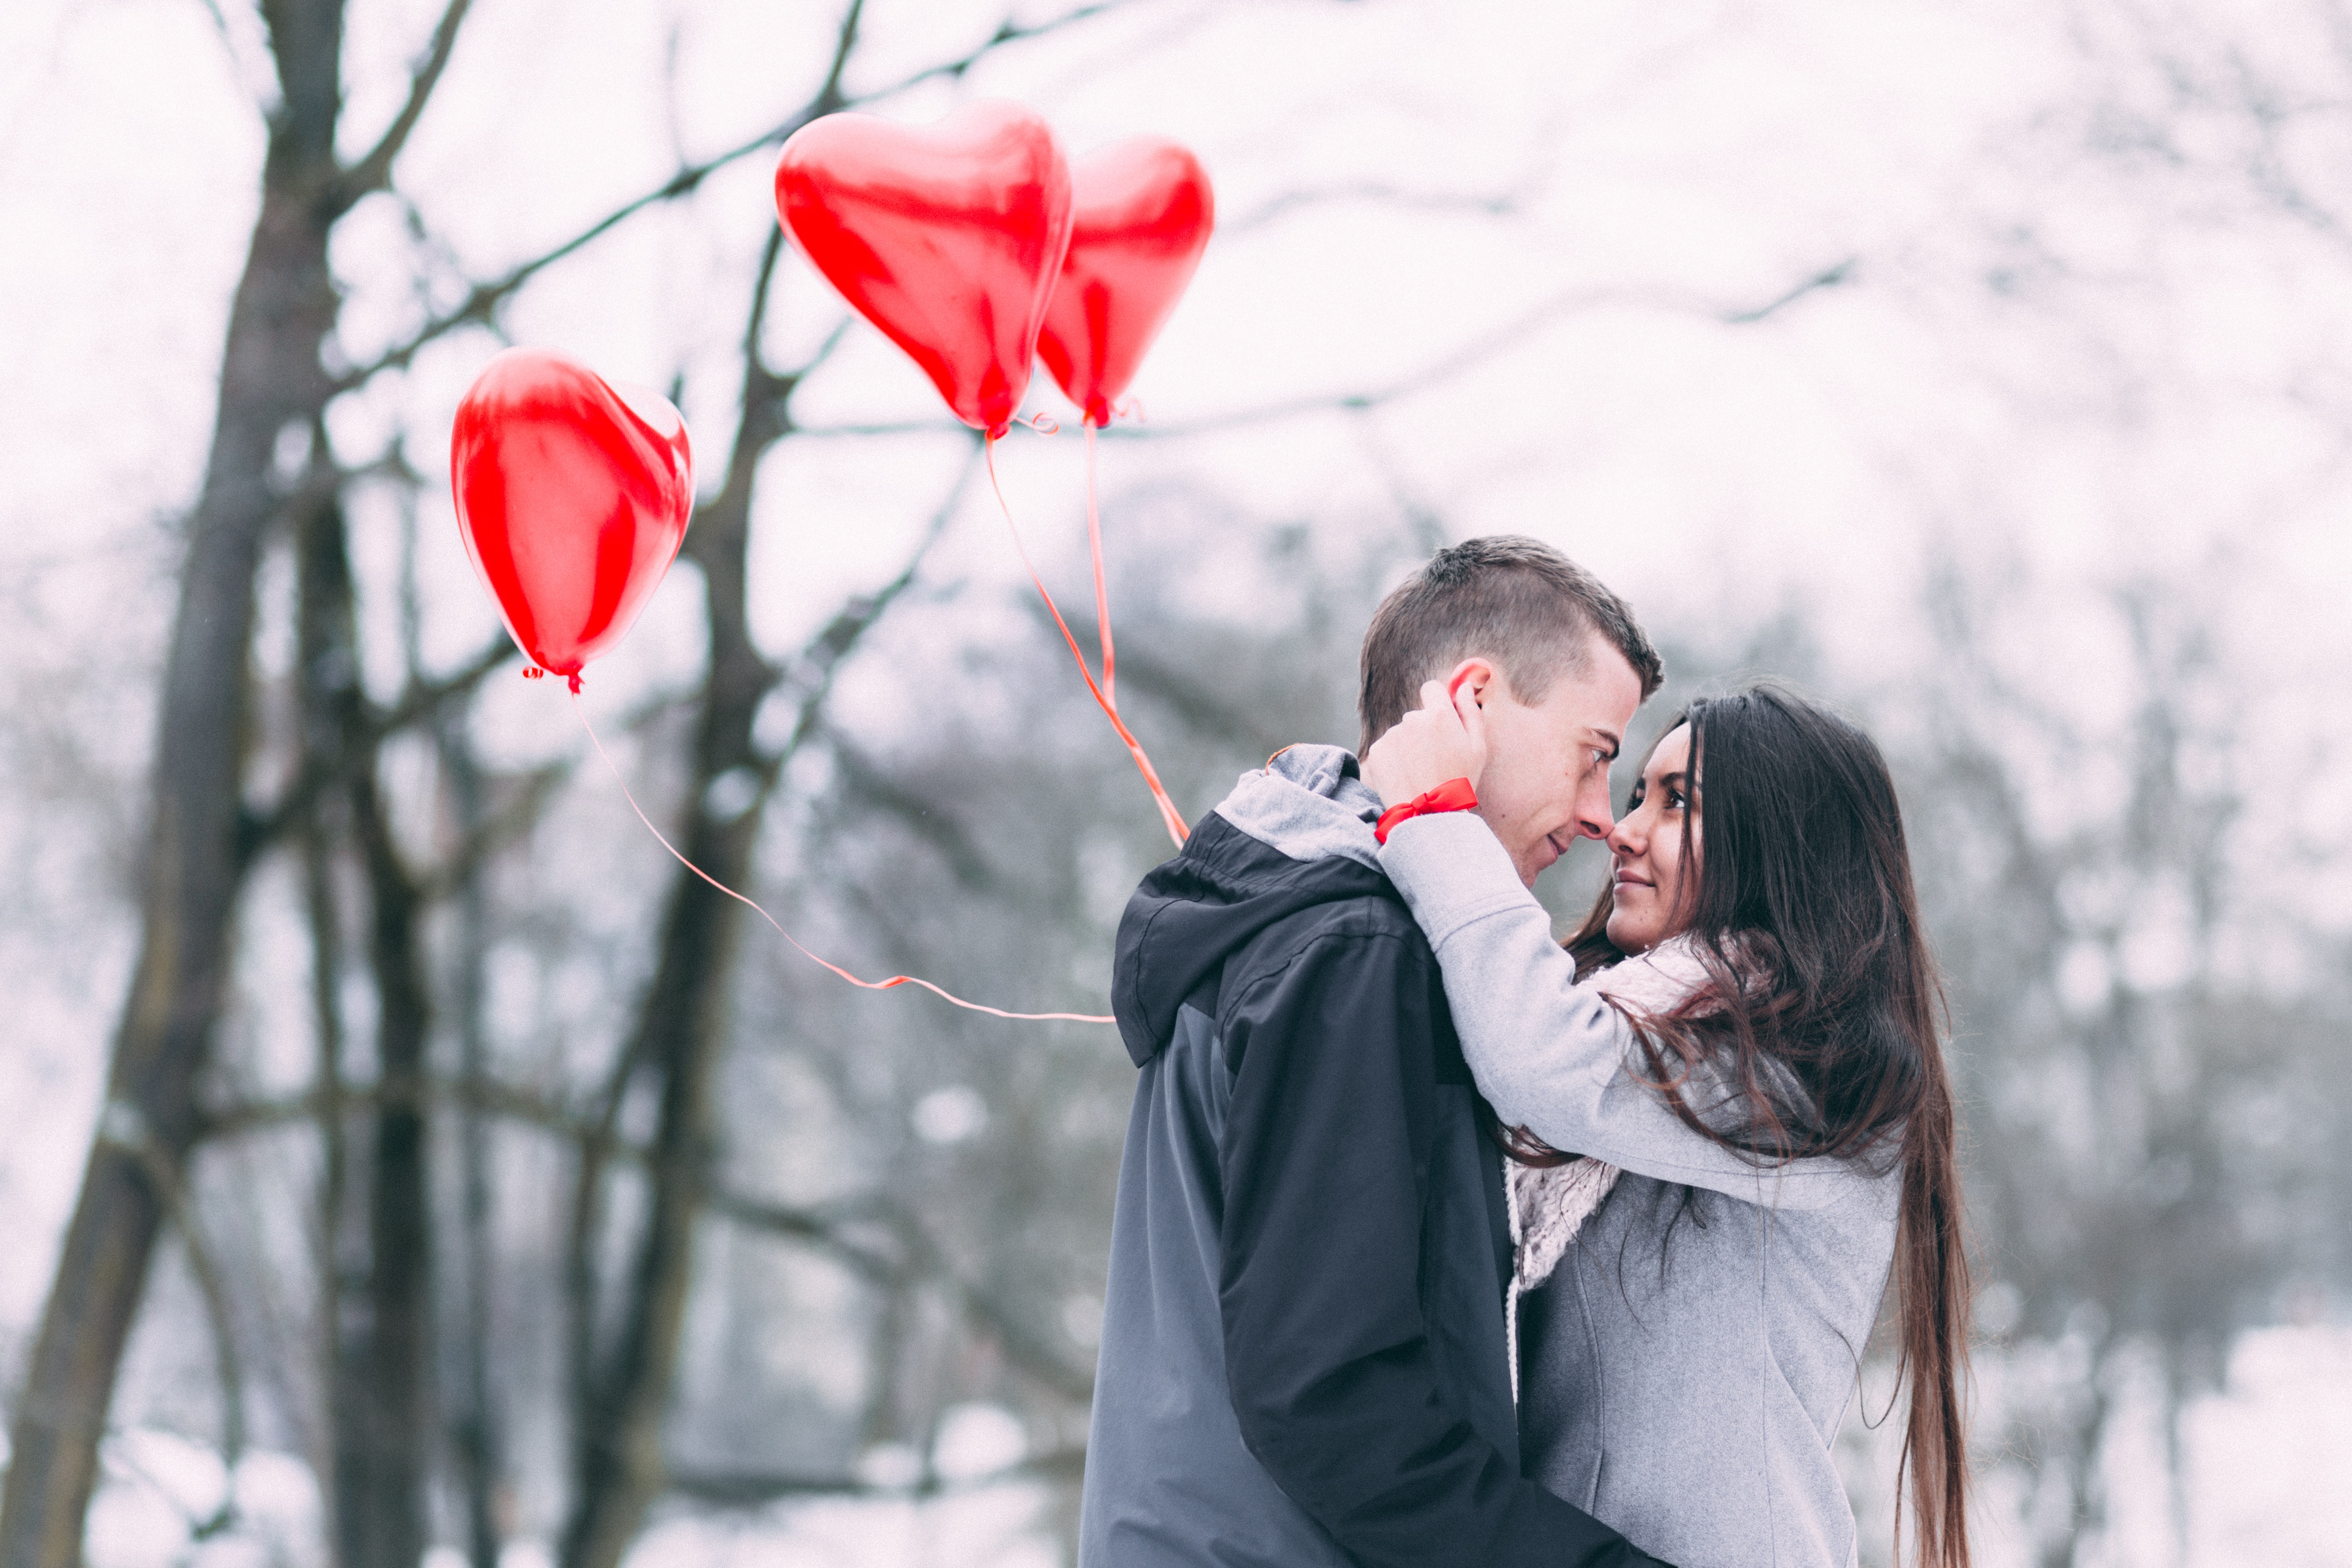 Two people with heart shape balloons in winter photo